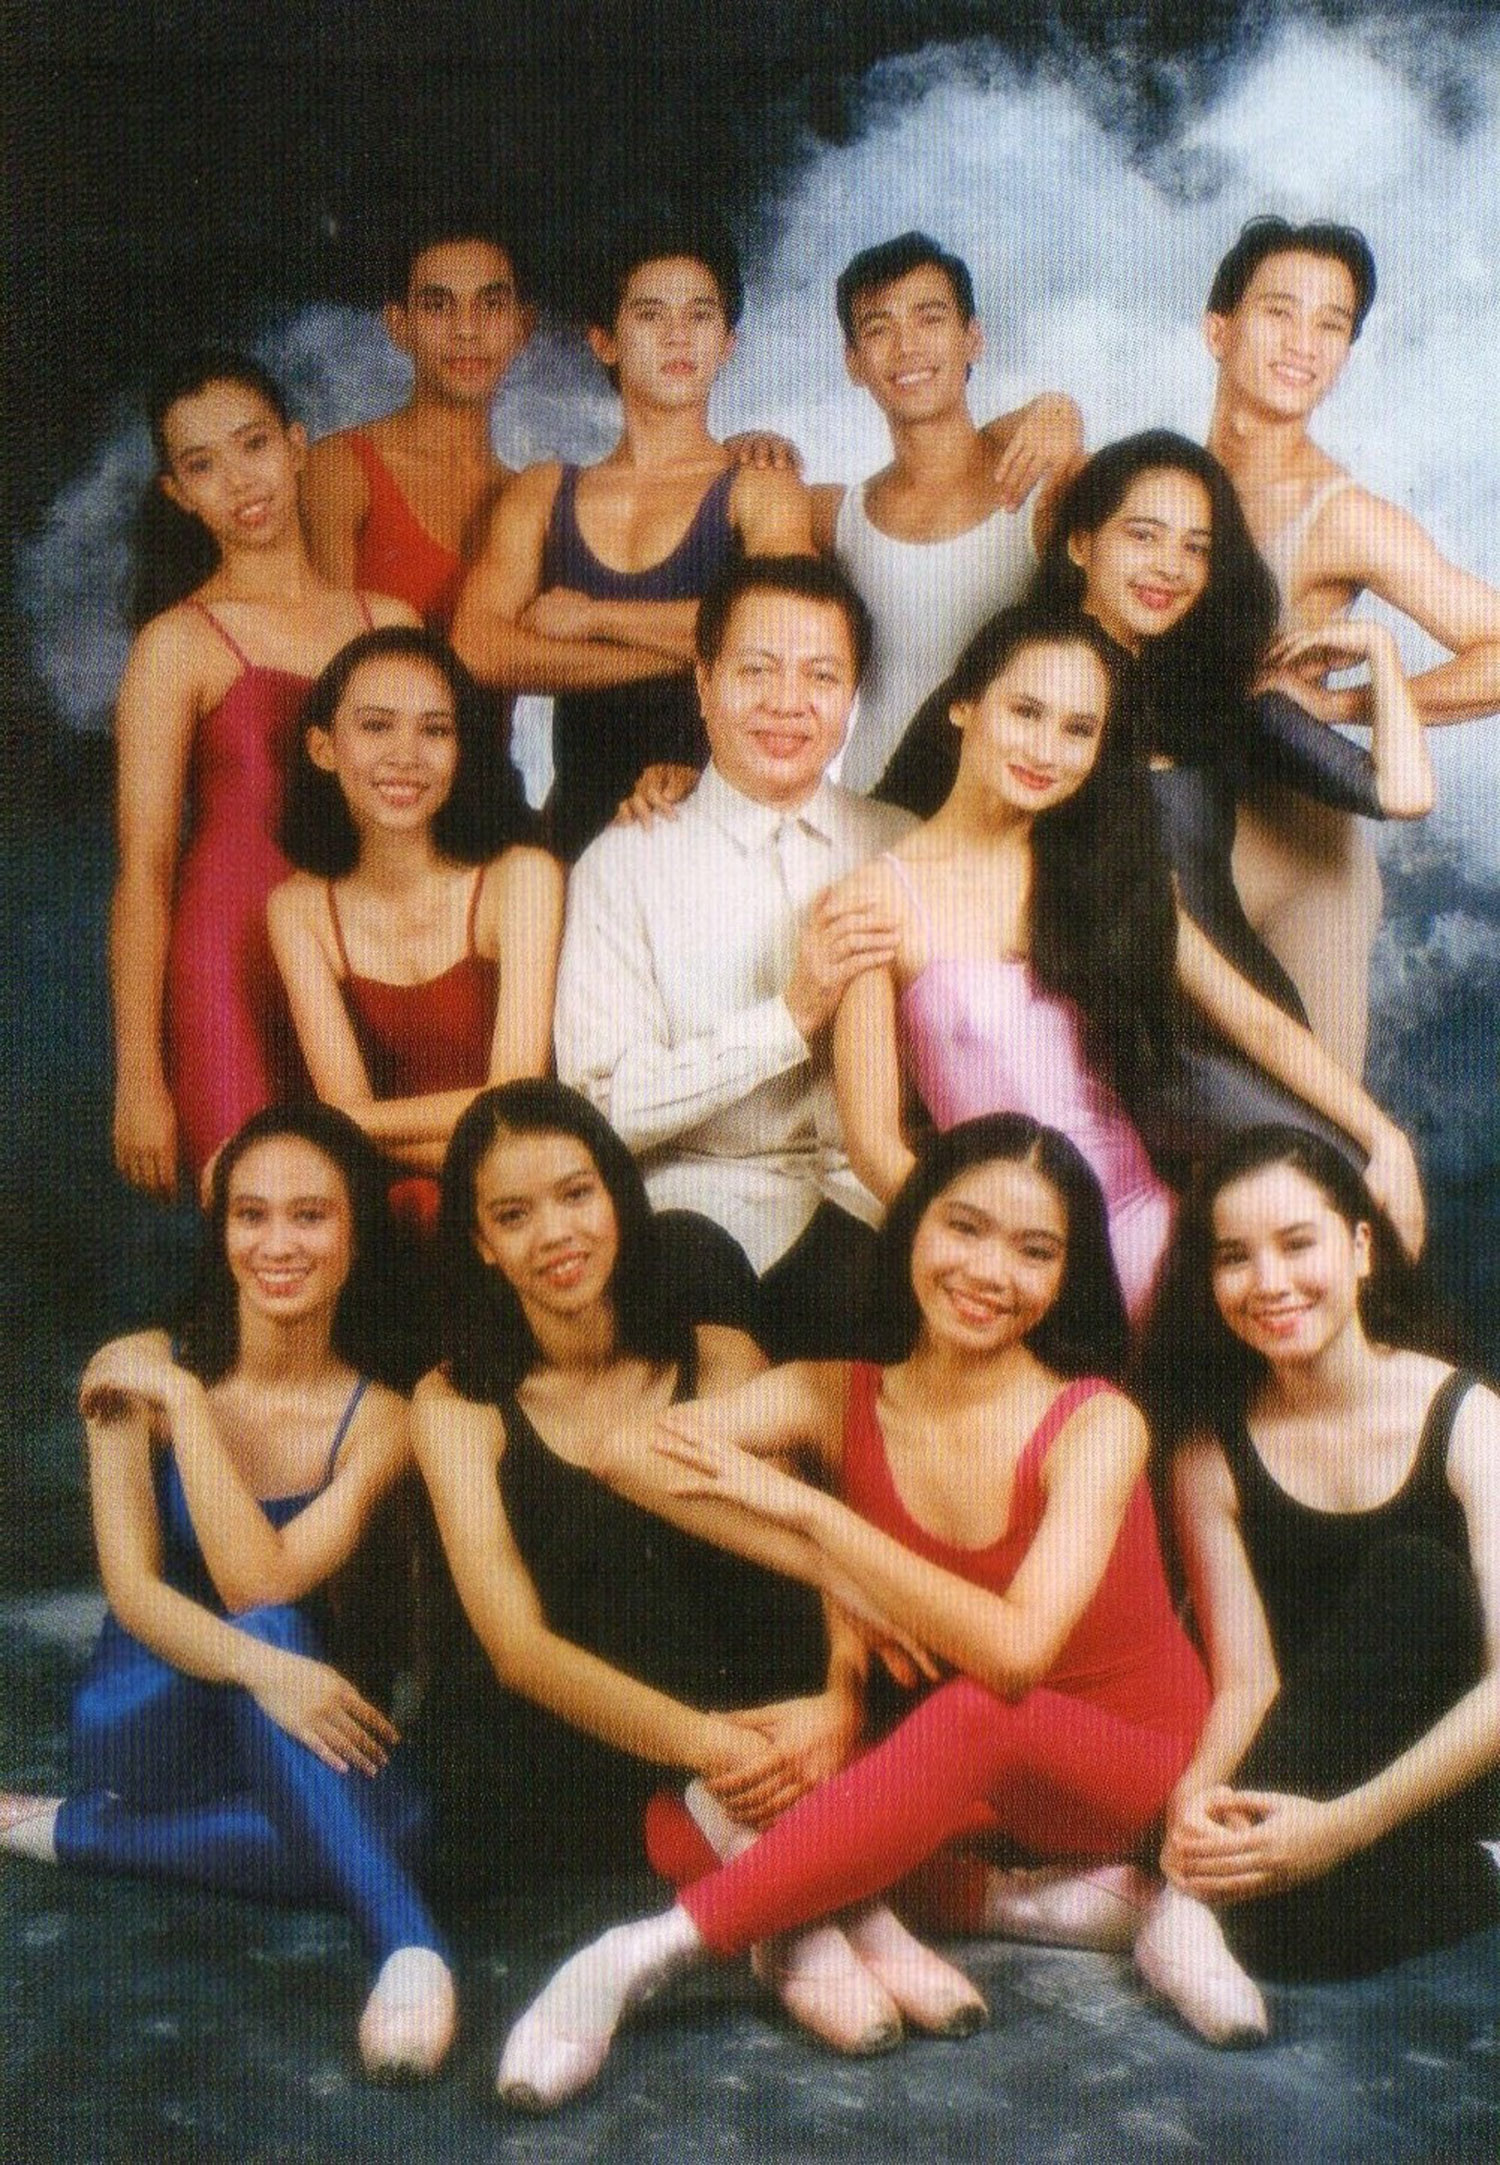 Twelve young dancers, including Eileen Lopez (standing, leftmost), formed Ballet Manila in 1995. The group is shown in this photo with late artistic director Eric V. Cruz.